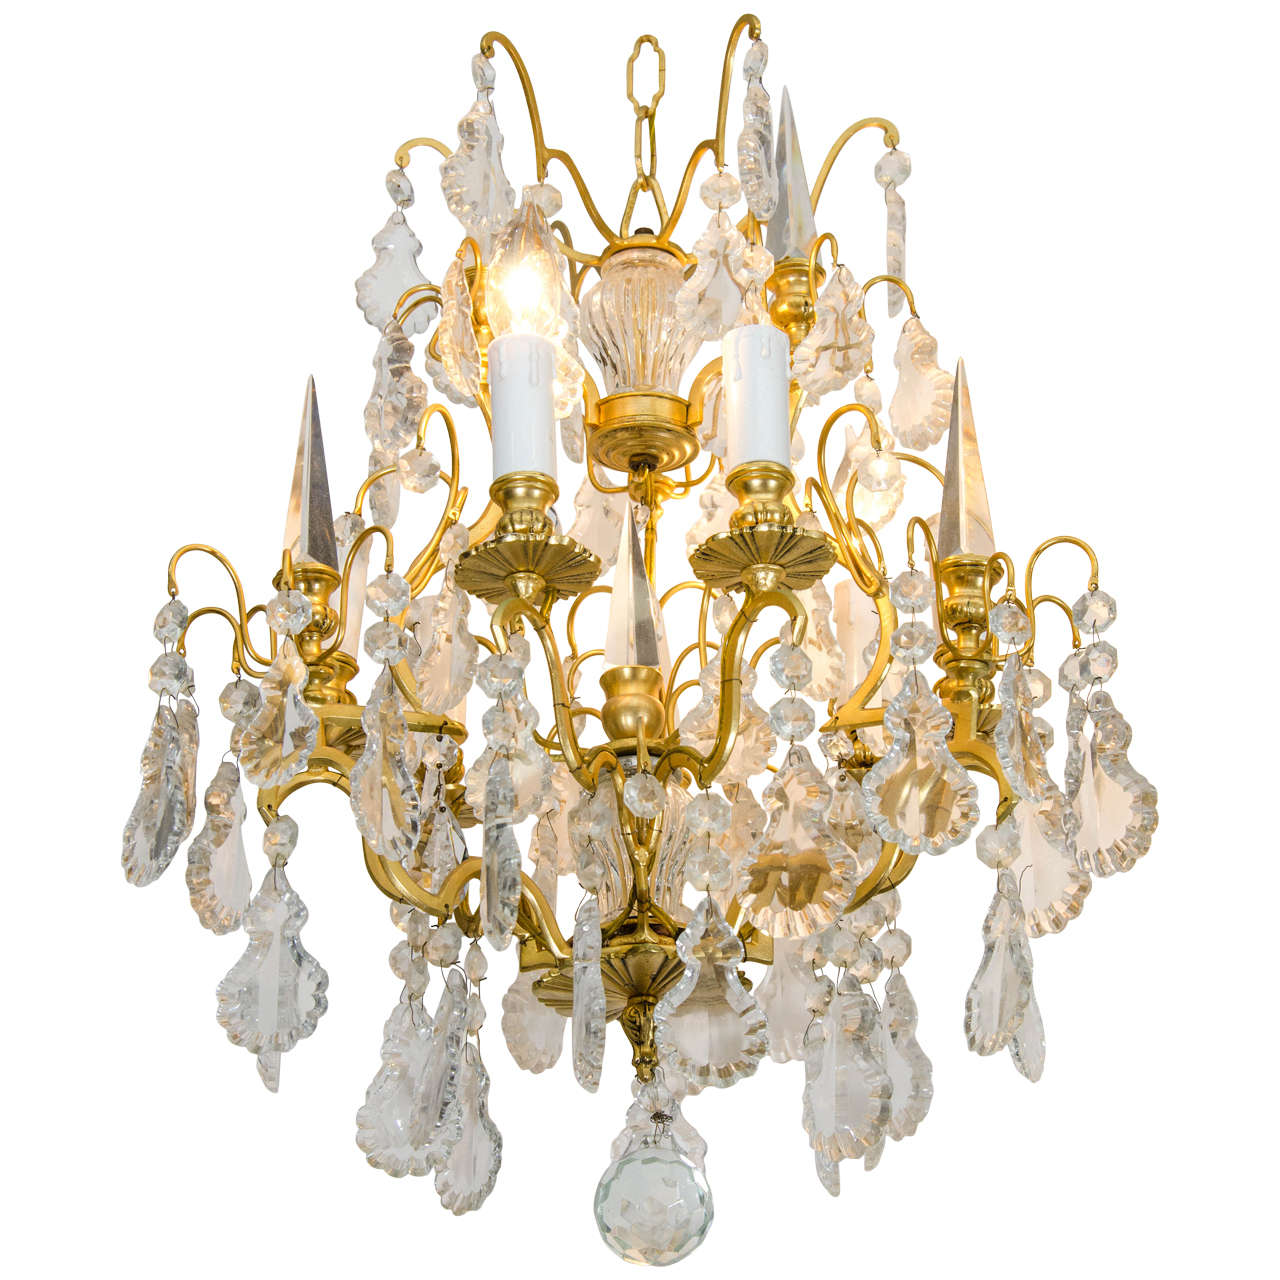  Gold Gilt Crystal Chandelier with Crystal Spikes